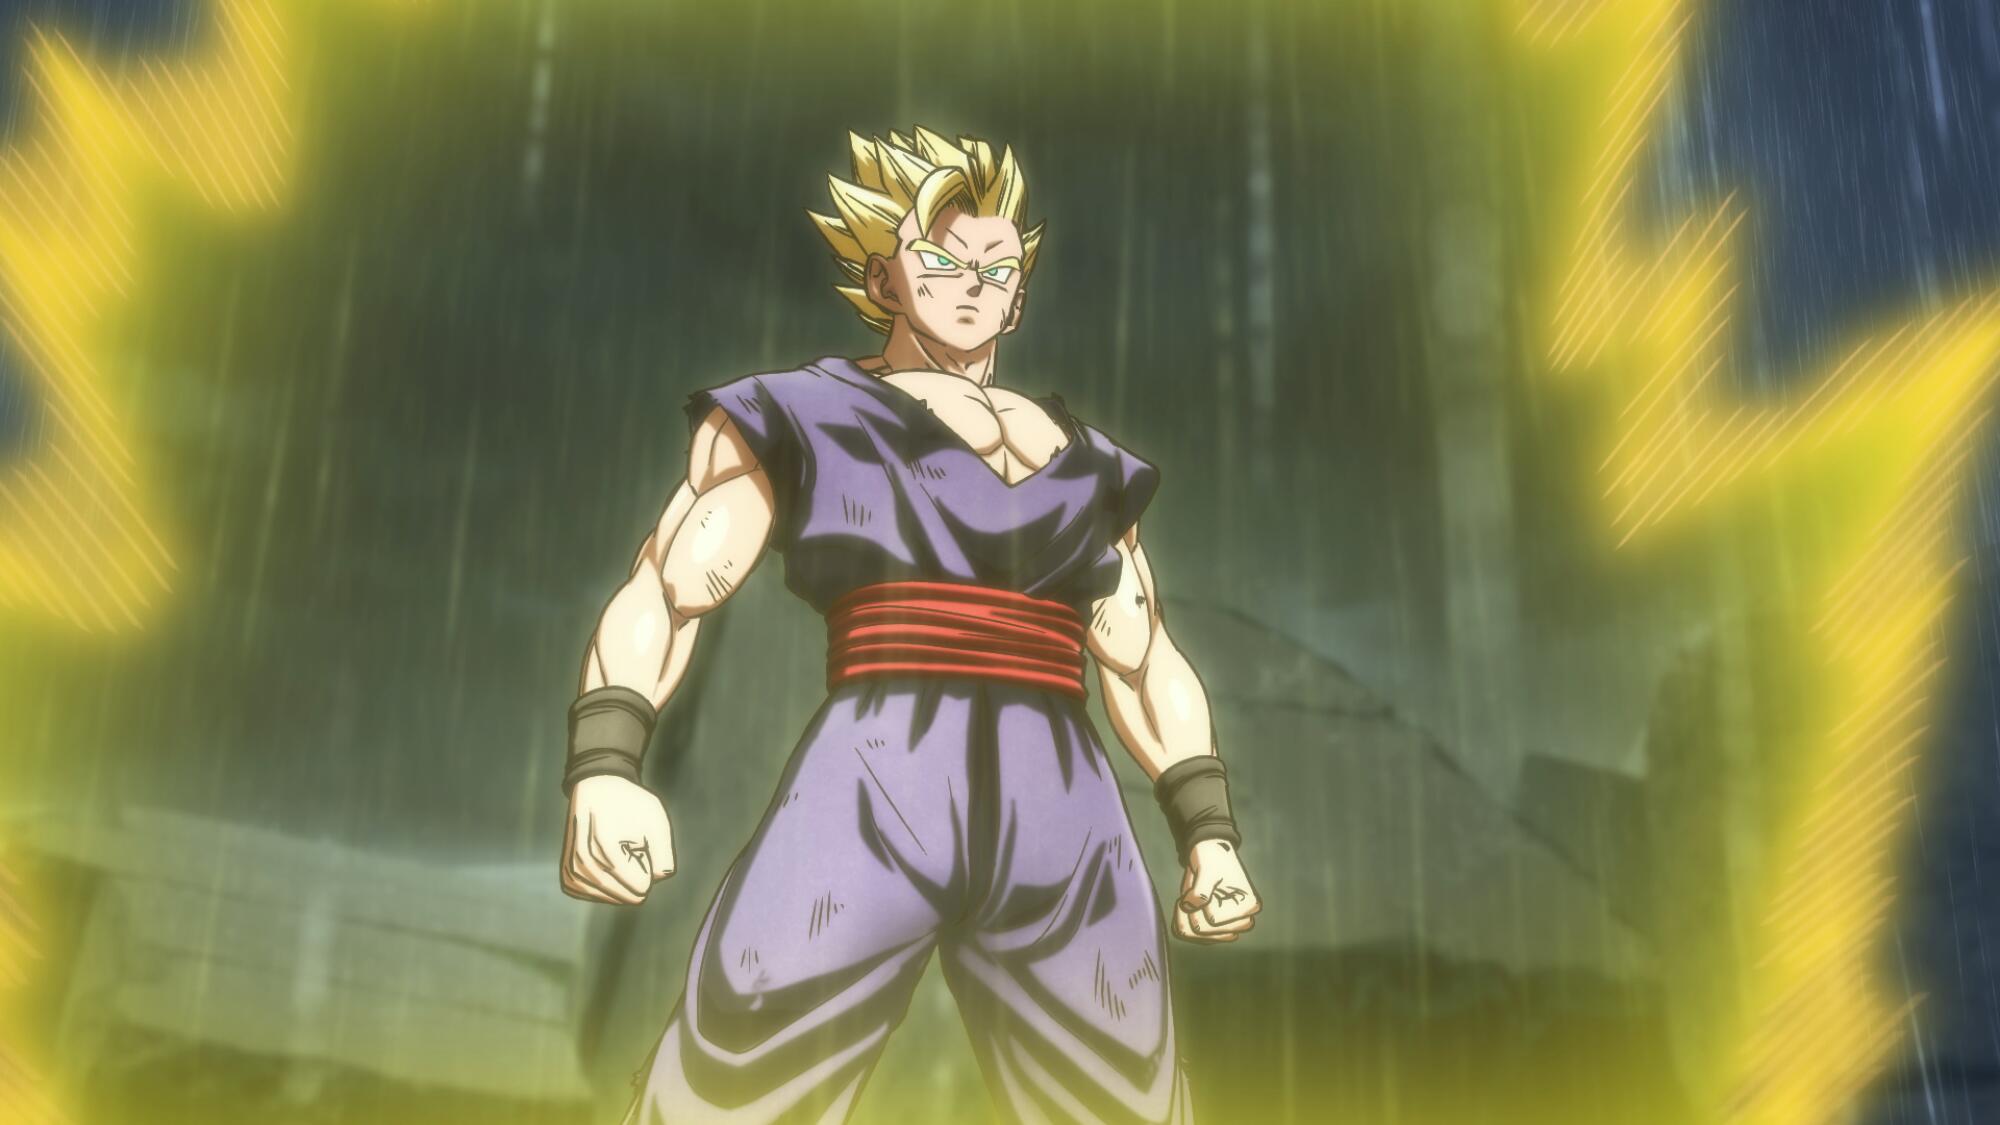 An anime still of a man standing in the rain surrounded by glowing energy